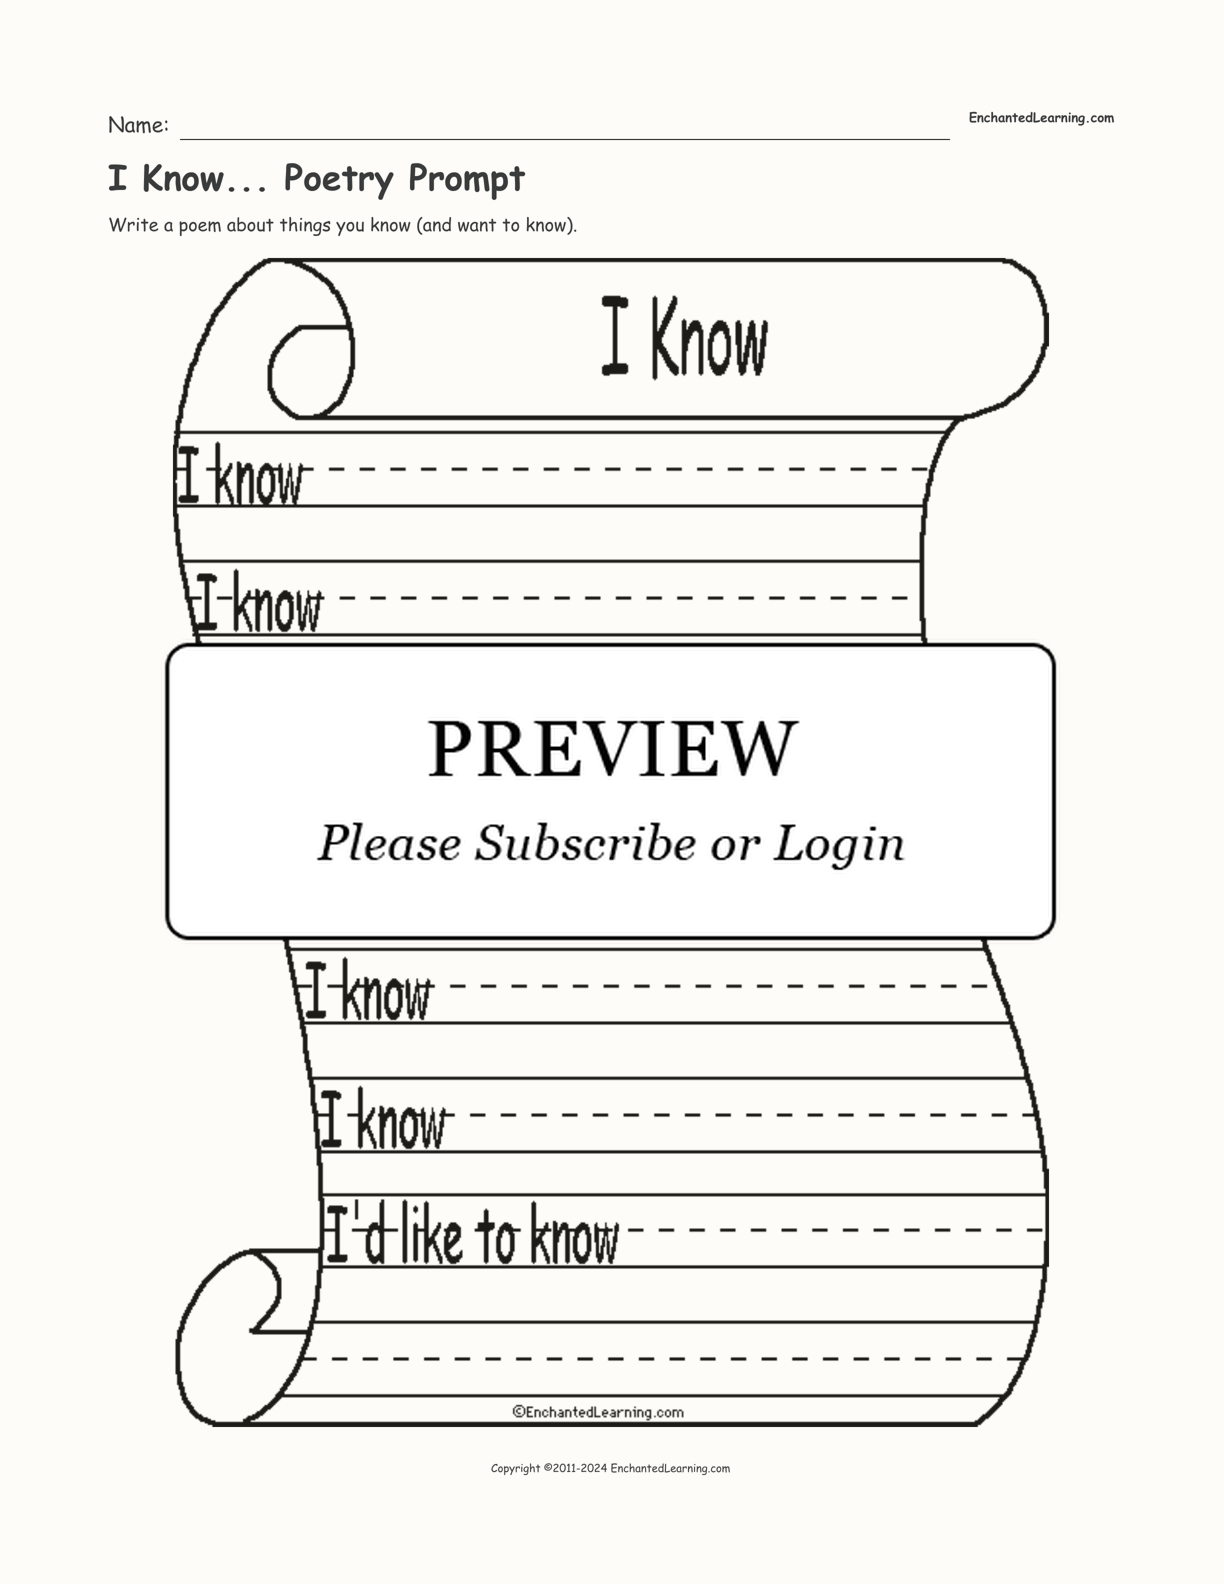 I Know... Poetry Prompt interactive worksheet page 1